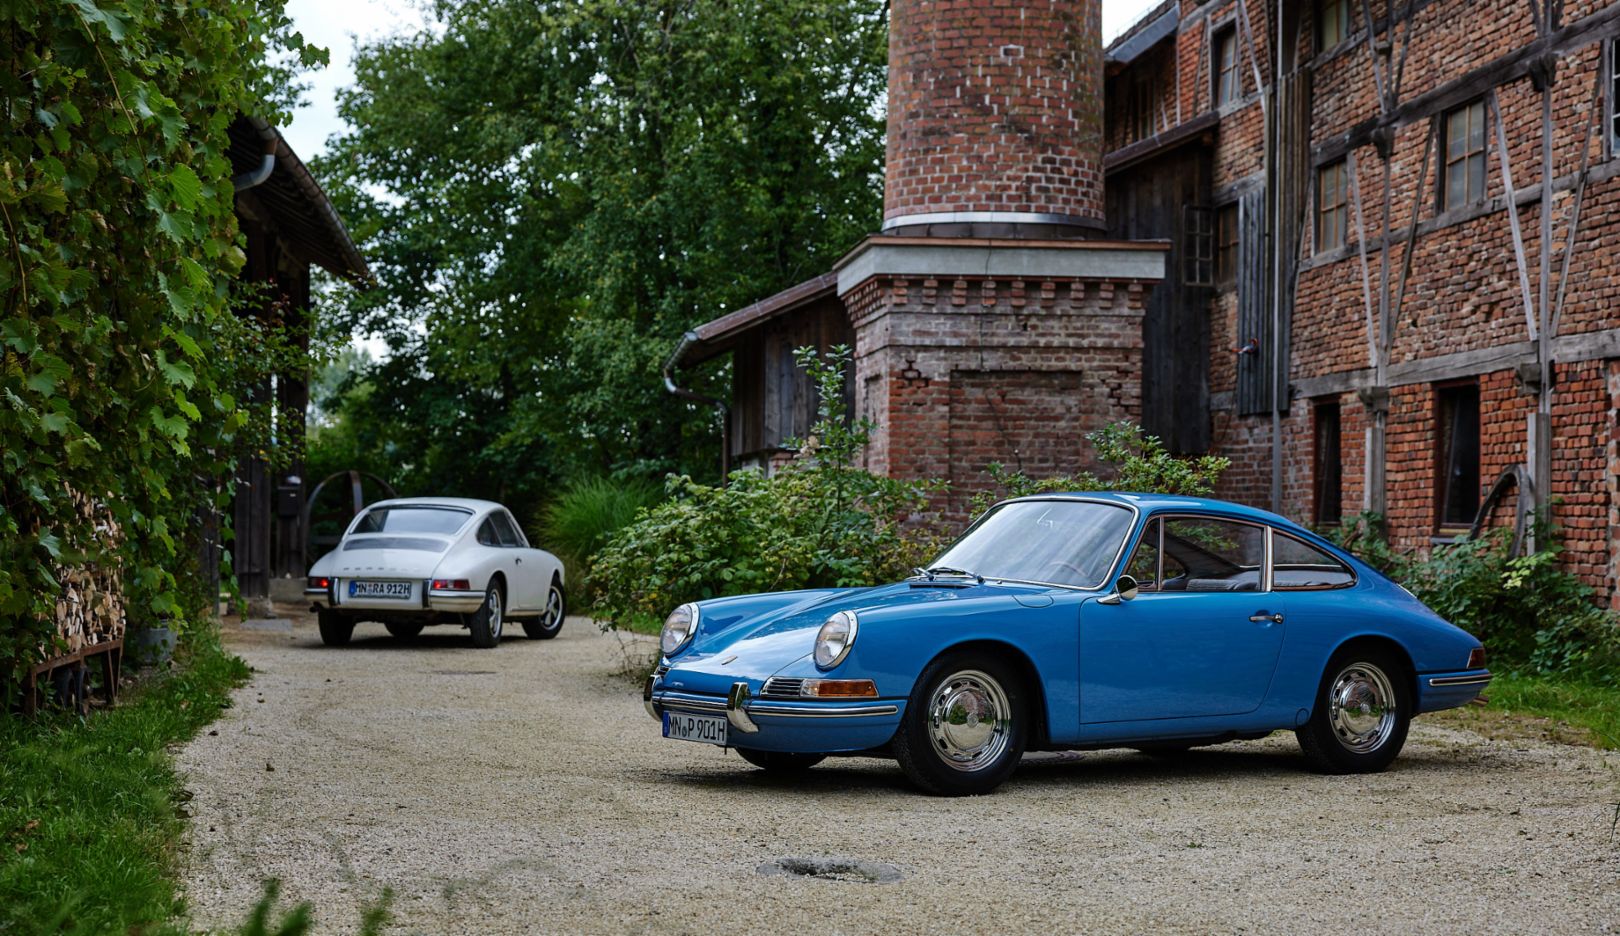 The 901 with its descendent: the series version of the 911.